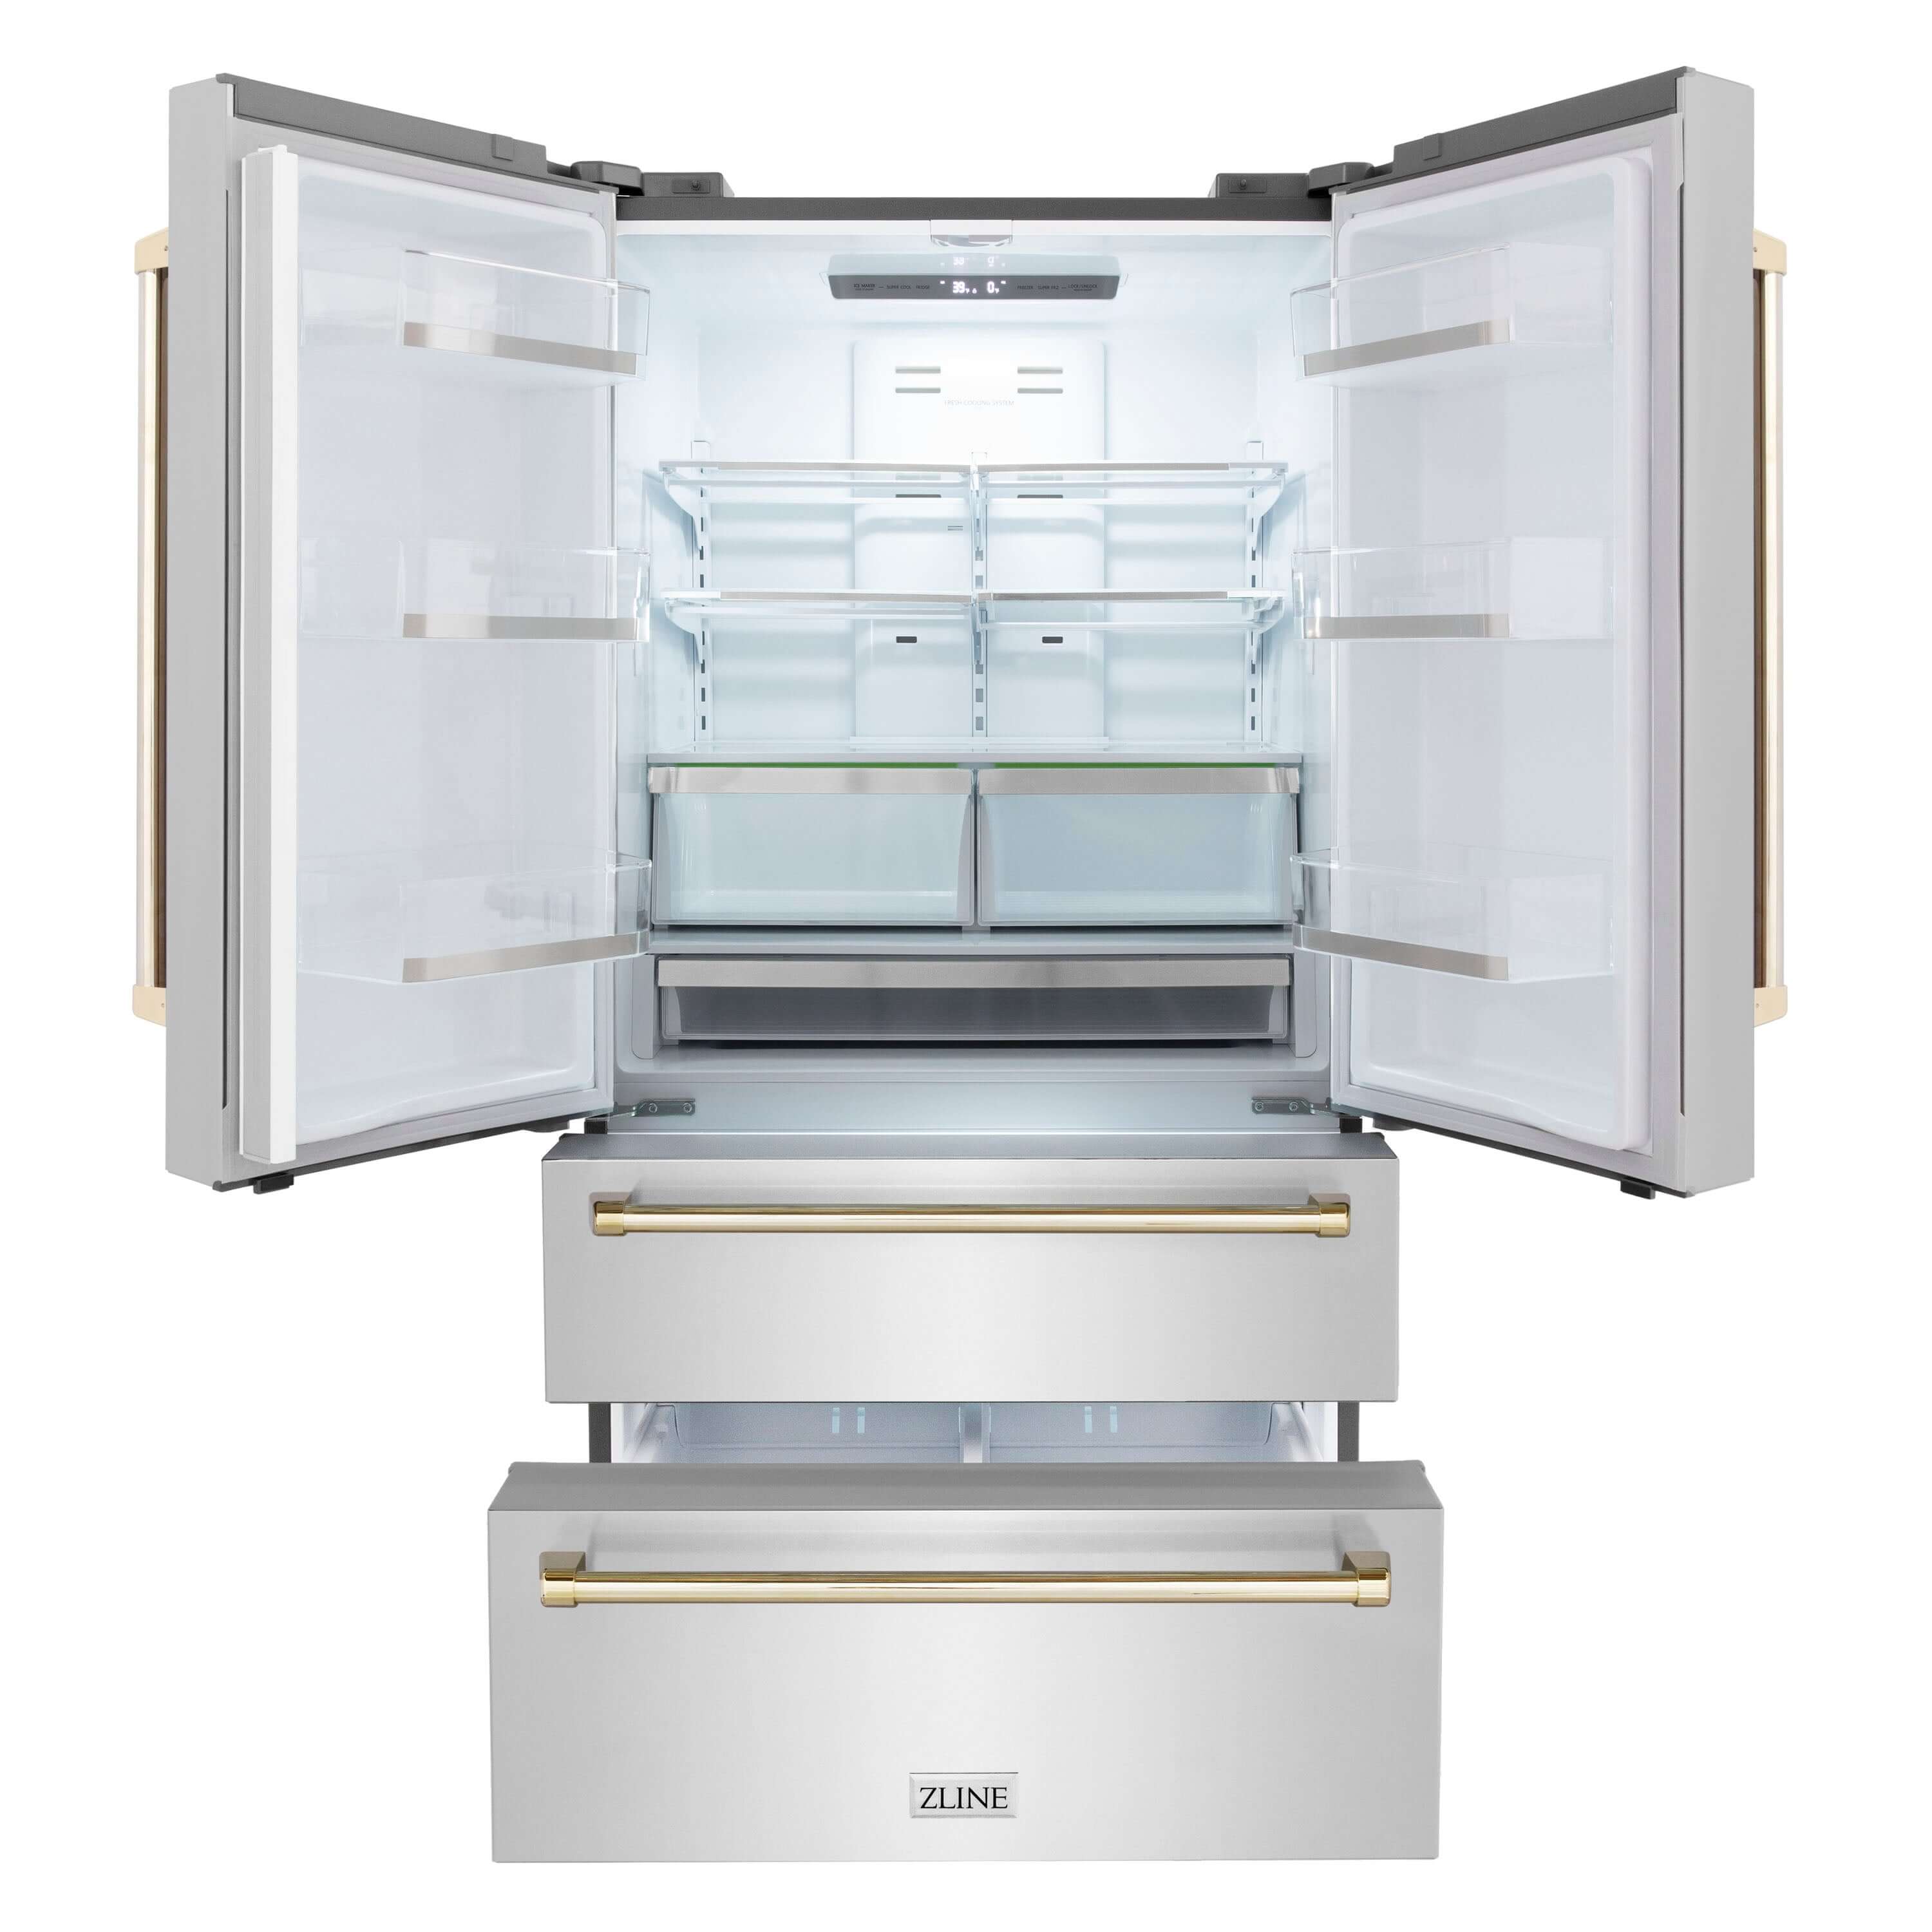 ZLINE Autograph Edition 36 in. French Door Refrigerator in Stainless Steel with Polished Gold Accents (RFMZ-36-G) front, with doors and bottom freezer drawers open.